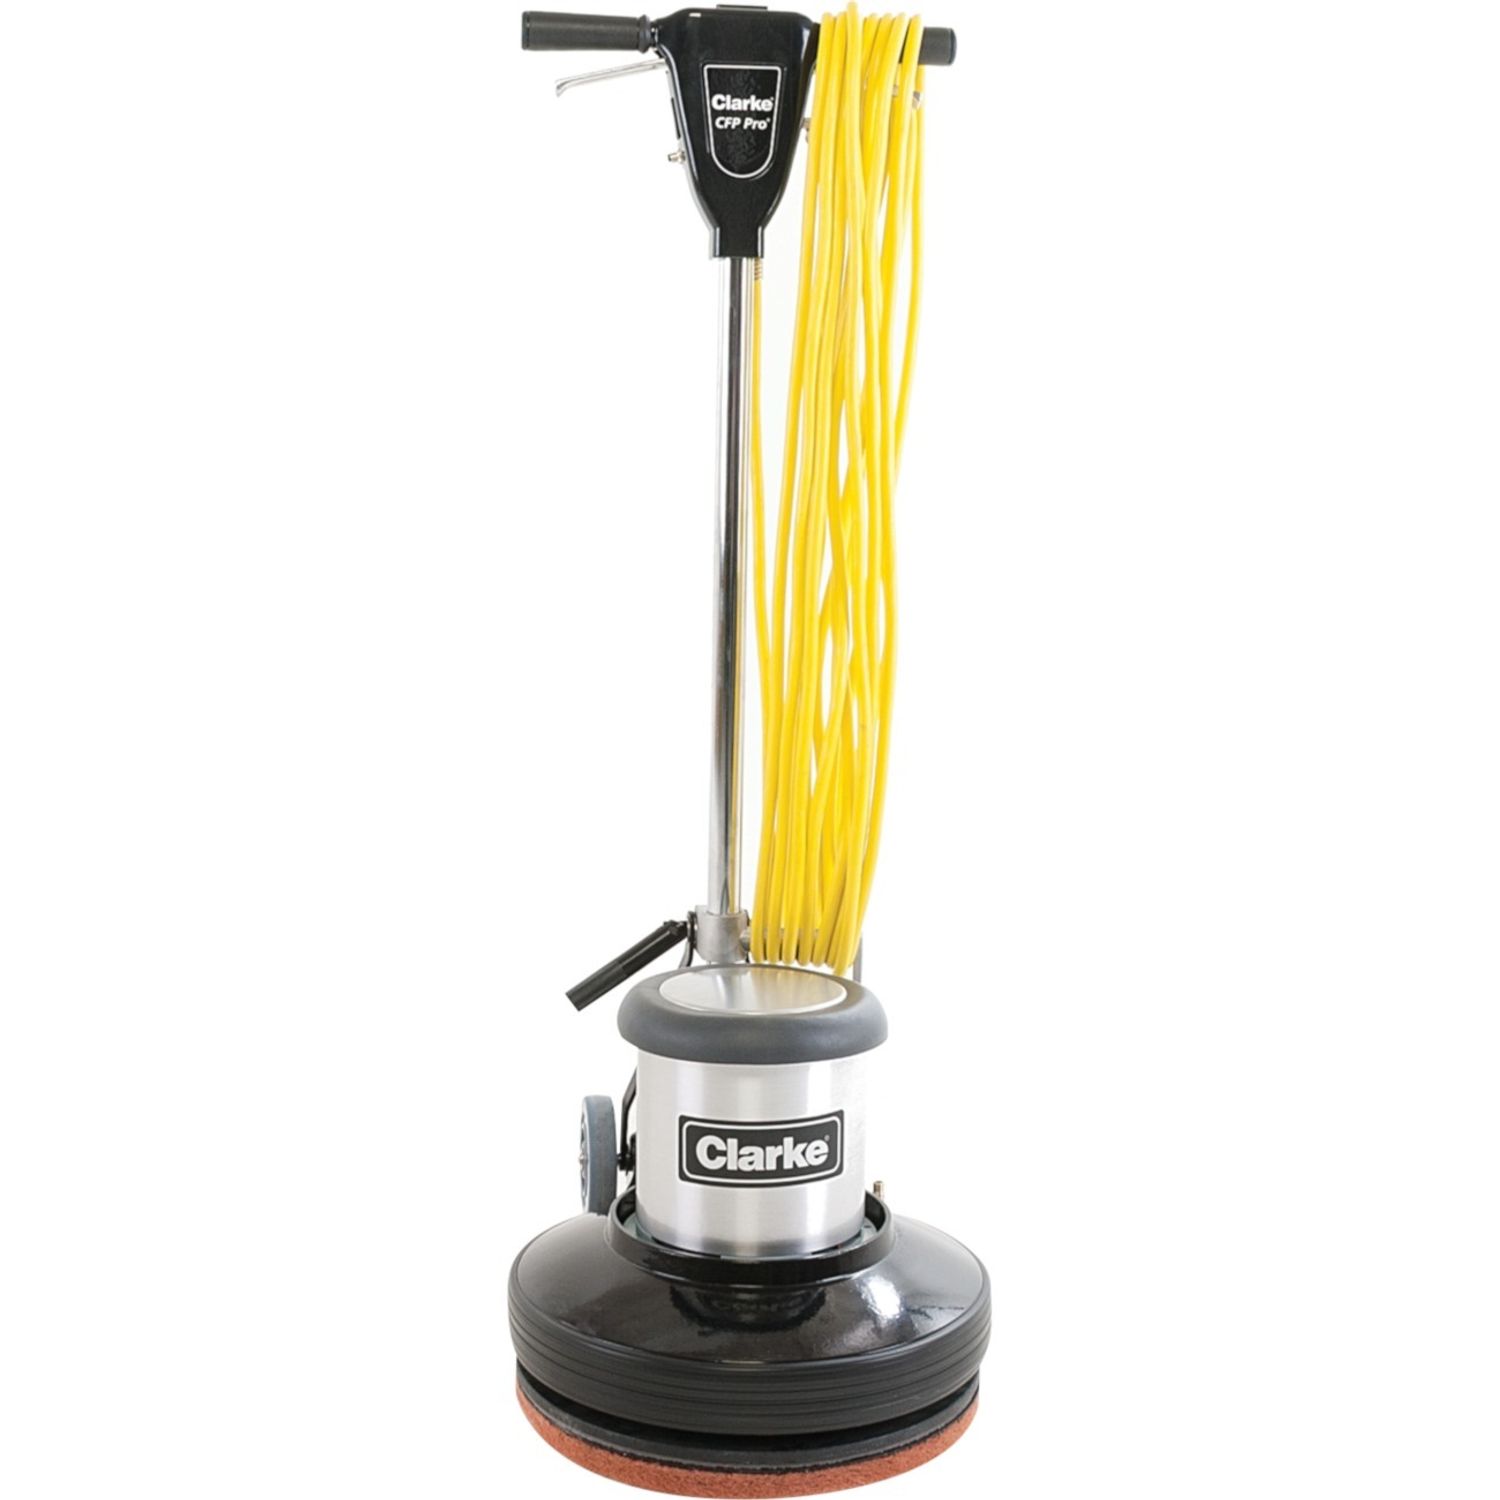 CFP Pro 17HD Floor Machine 1118.55 W Motor, 50 ft Cable Length, AC Supply, 120 V AC, 13 A, 63 dB(A) Noise, Yellow